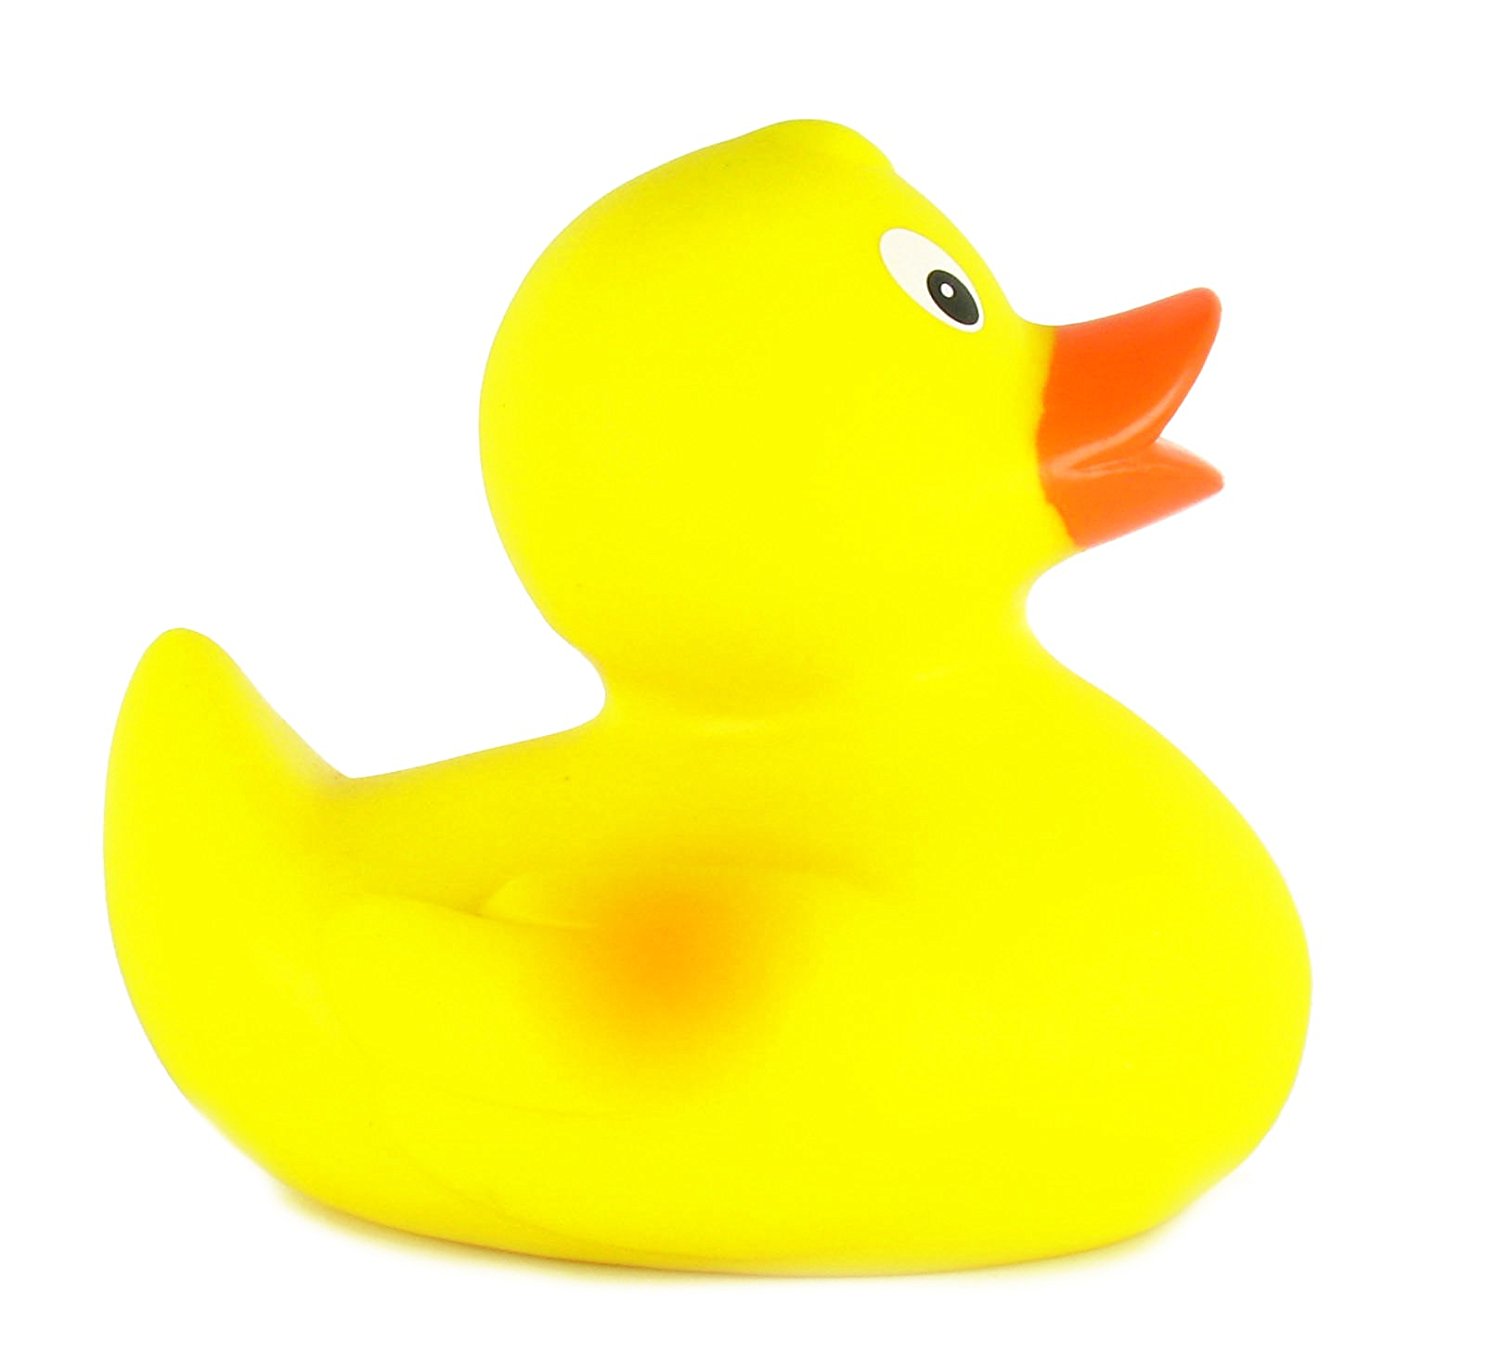 Amazon.com : Classic Yellow Rubber Ducky by Schylling : Bathtub Toys ...